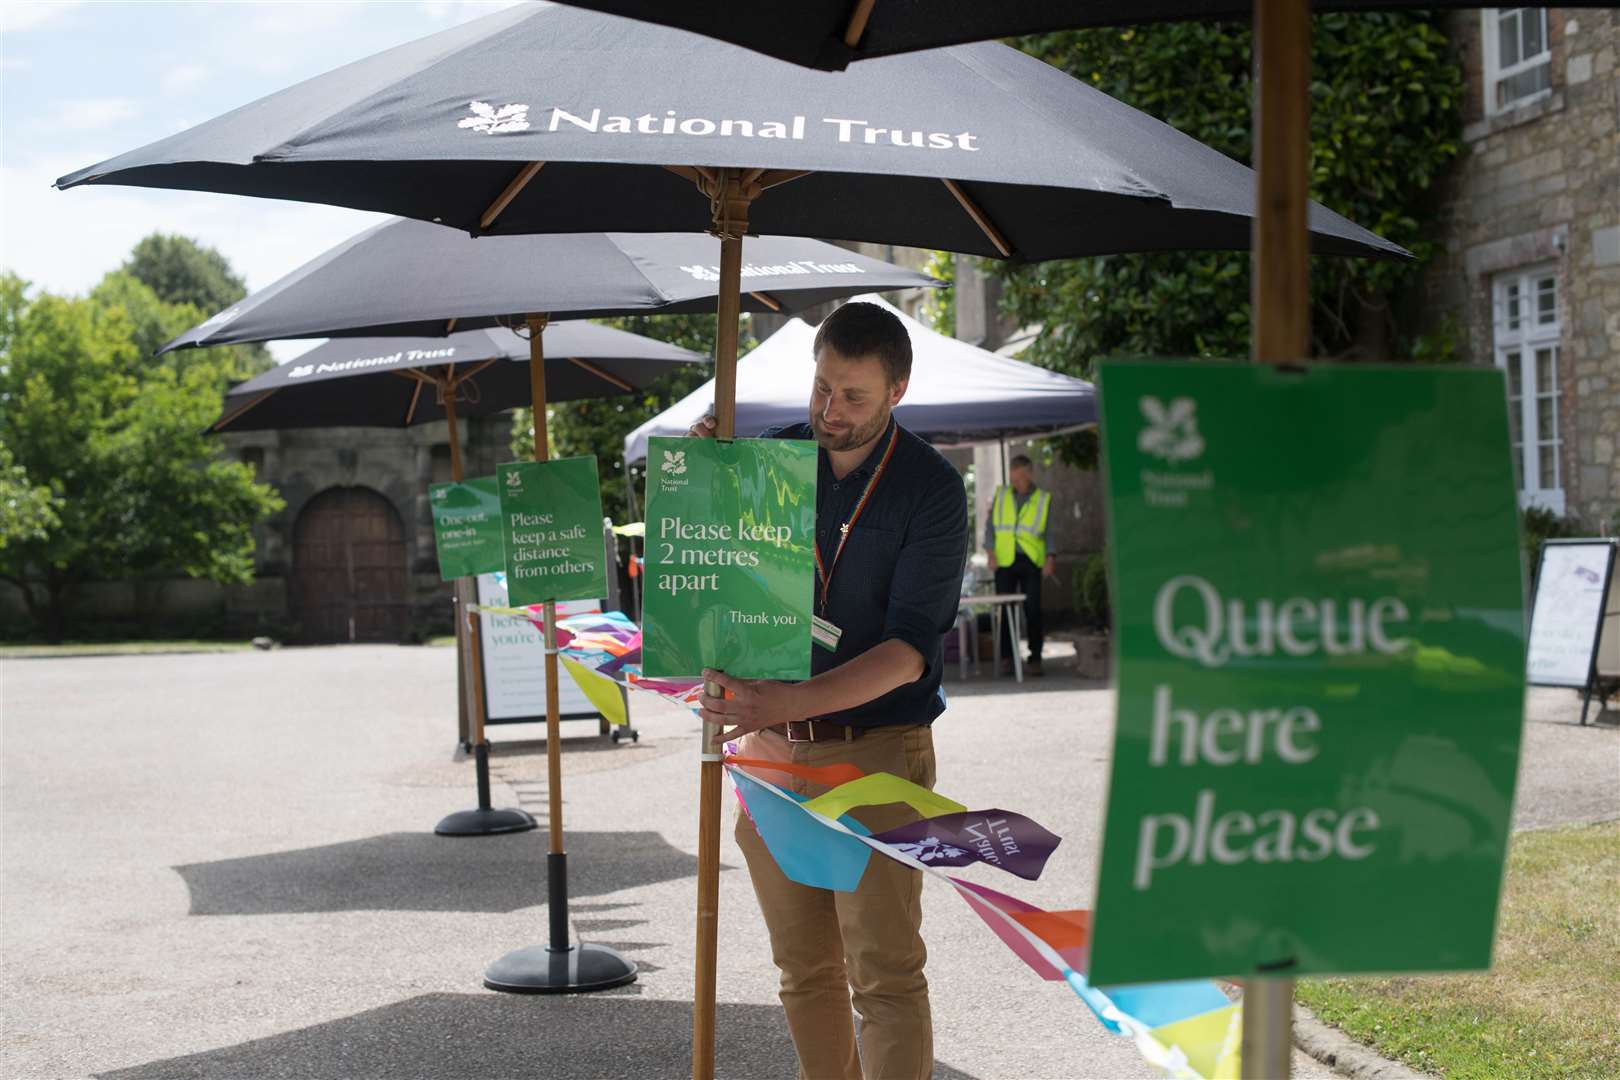 Signage at the National Trust’s Petworth House in West Sussex as it welcomes back visitors (Stefan Rousseau/PA)